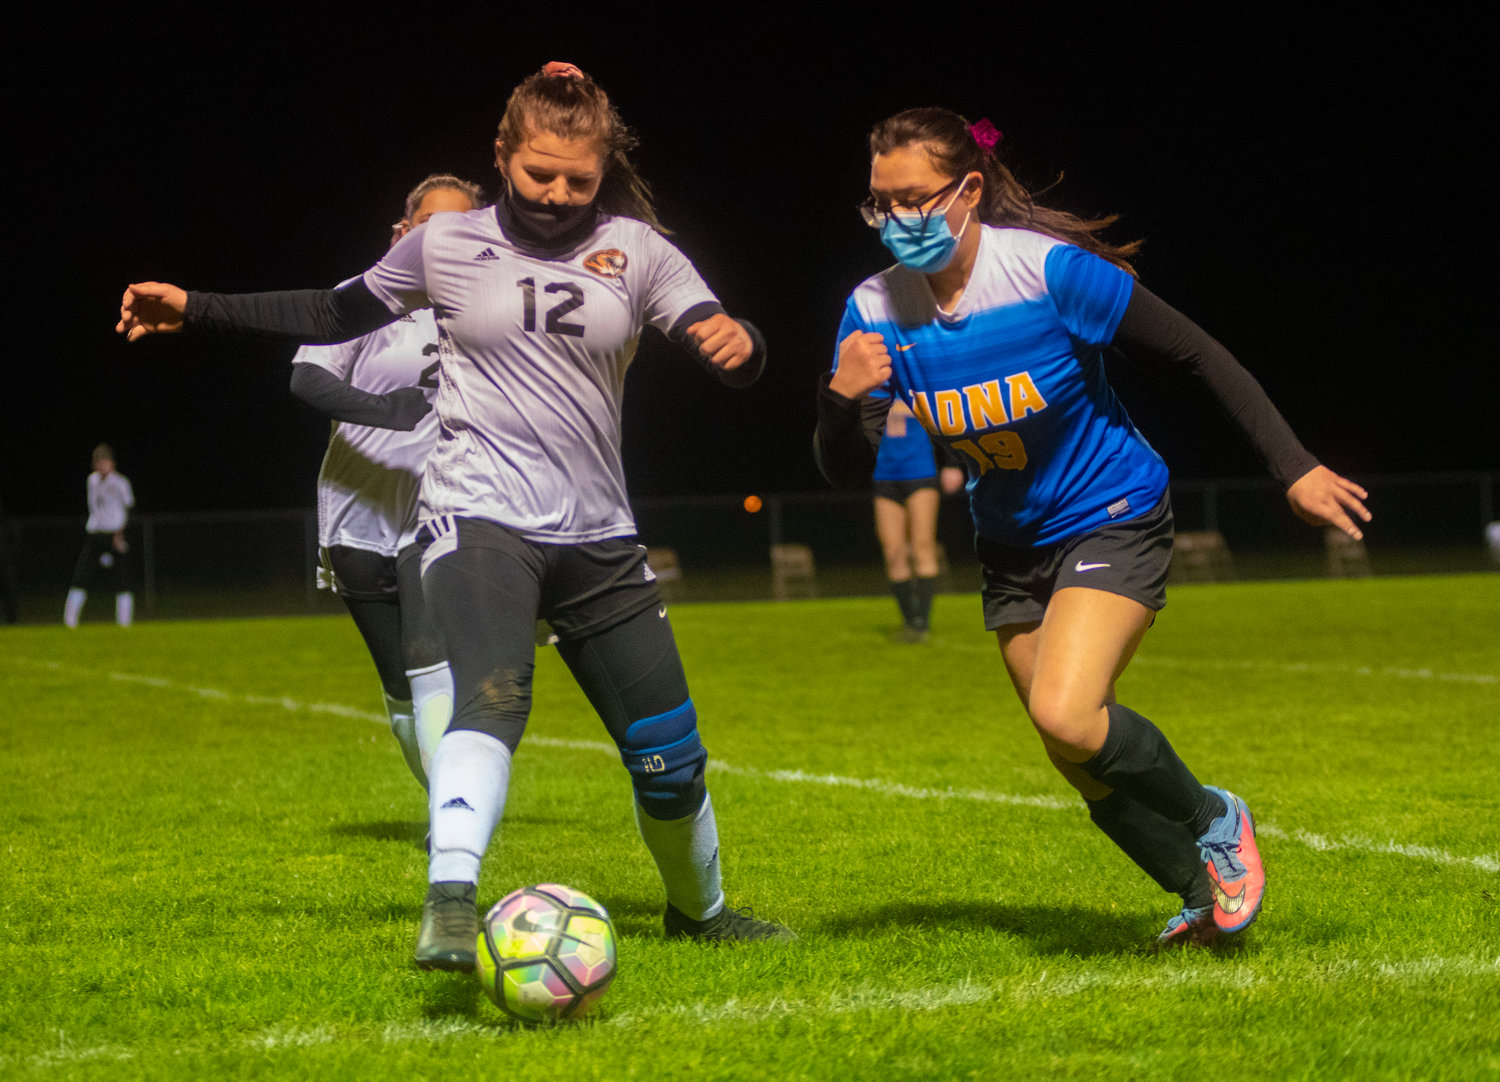 Napavine's Madison Lopes (12) tries to keep the ball away from Adna's Leanna Tripp.